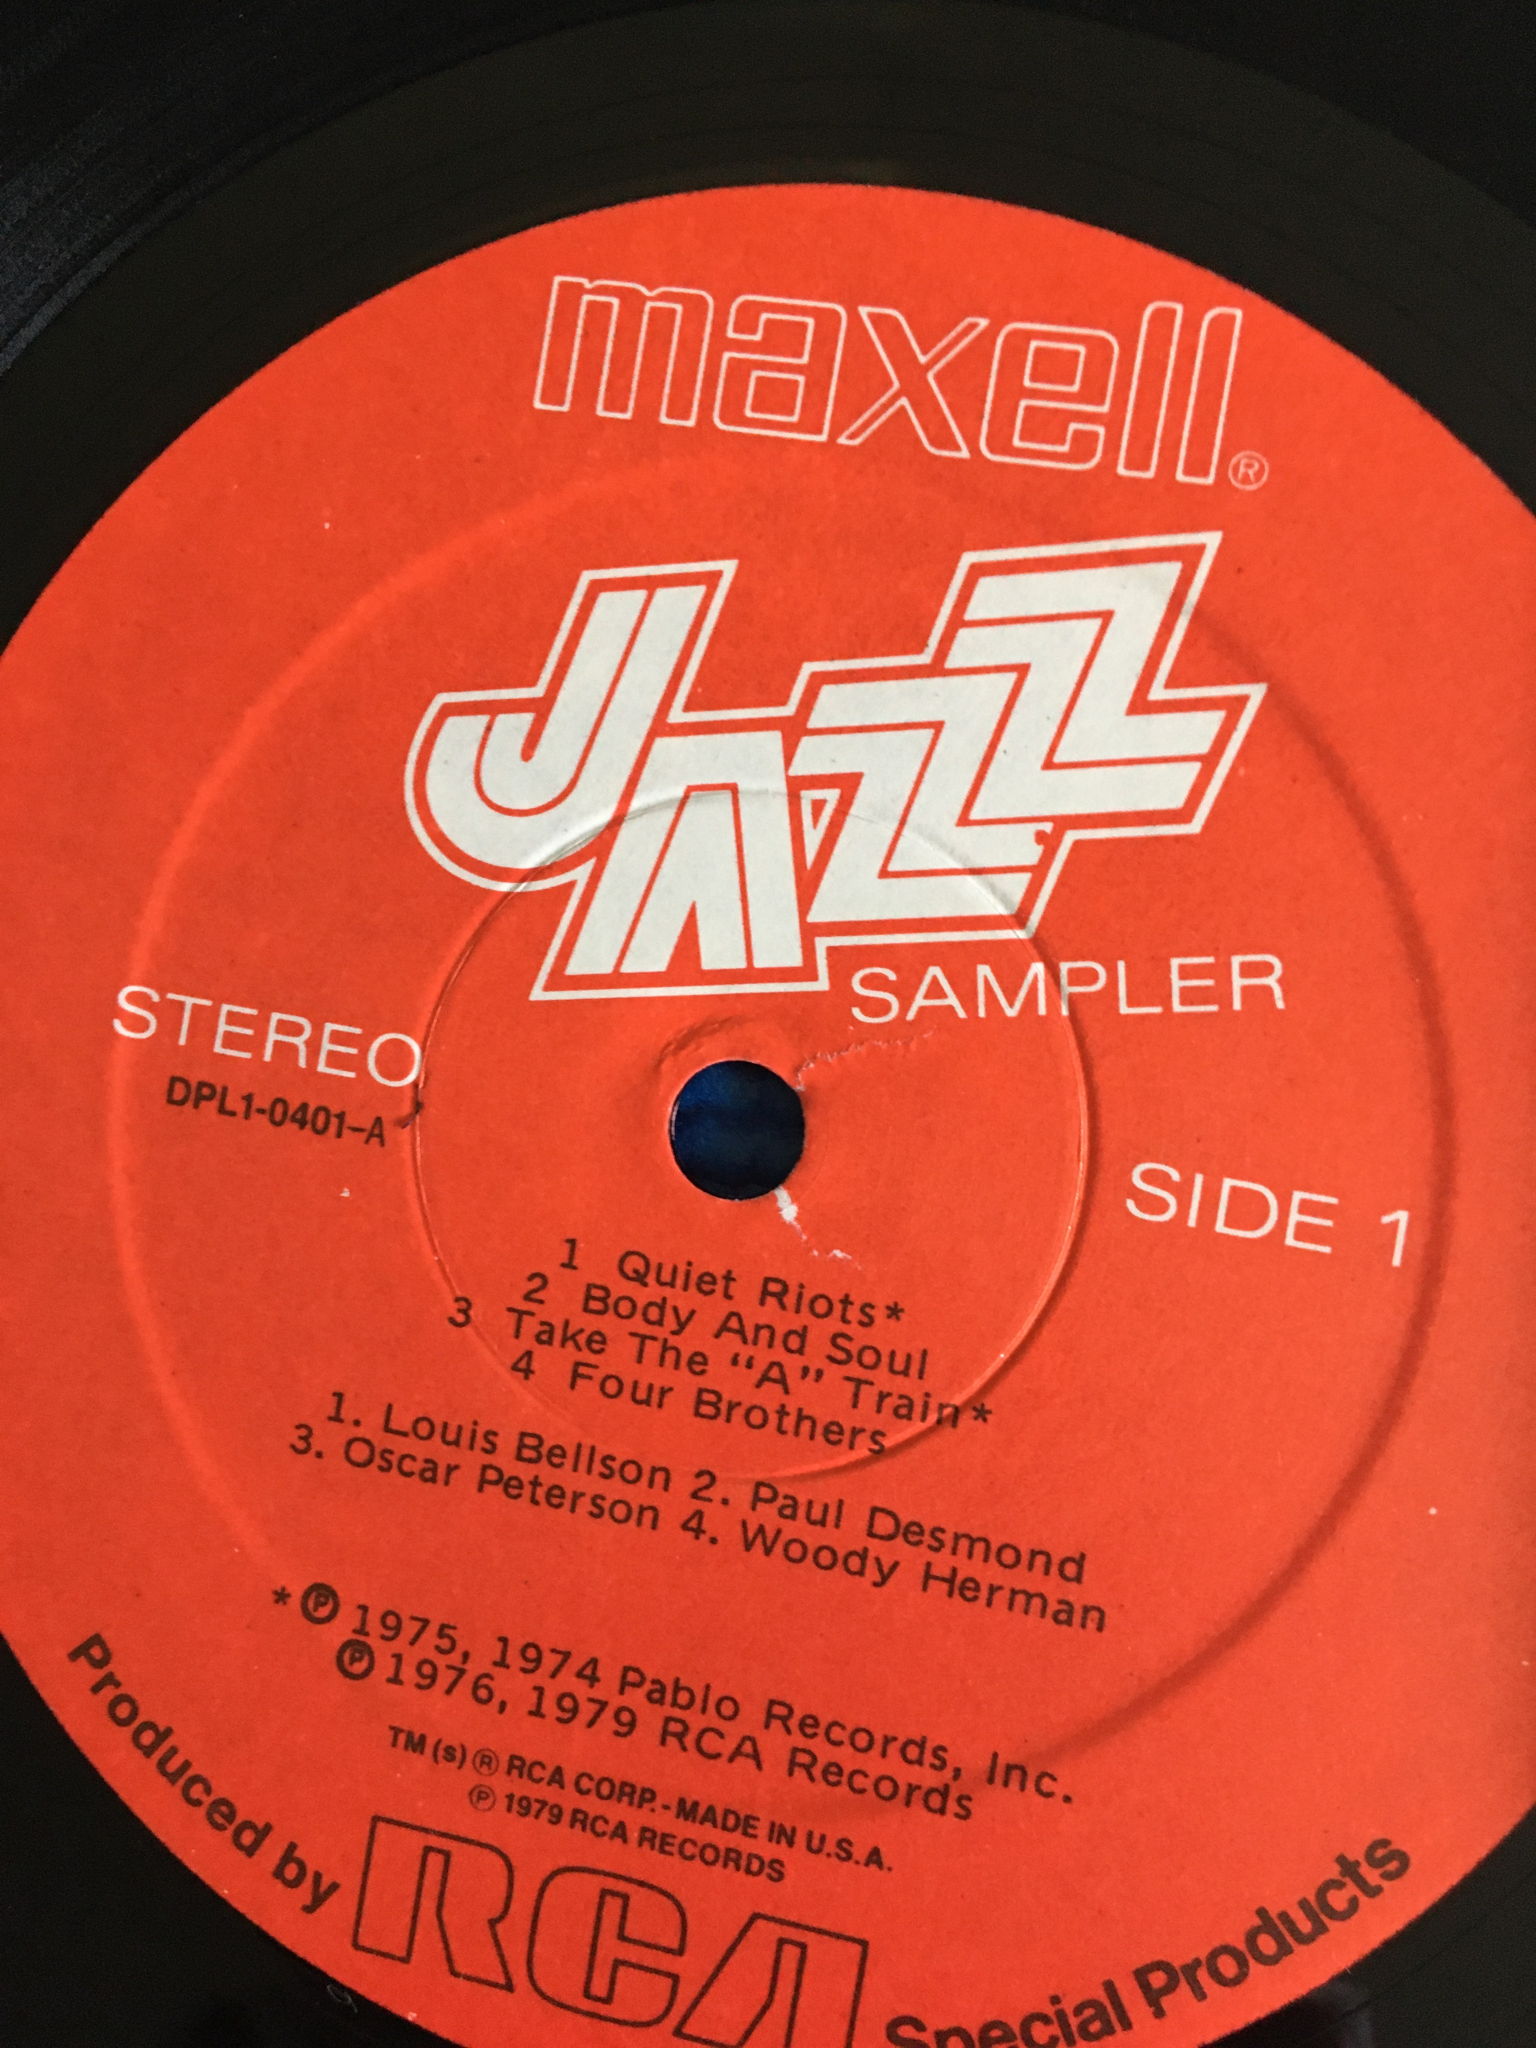 Maxell sampler jazz A limited edition stereo recording ... 5